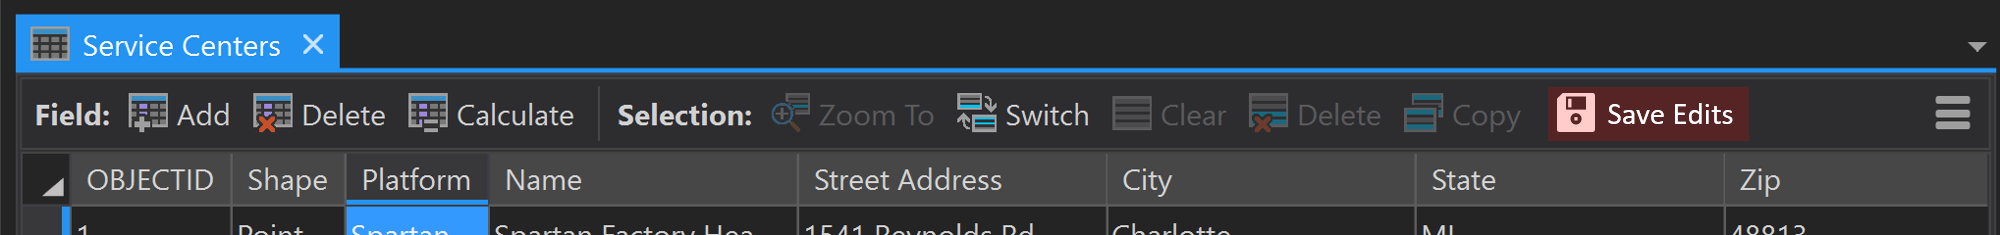 mockup of save edits button added to attributes pane toolbar